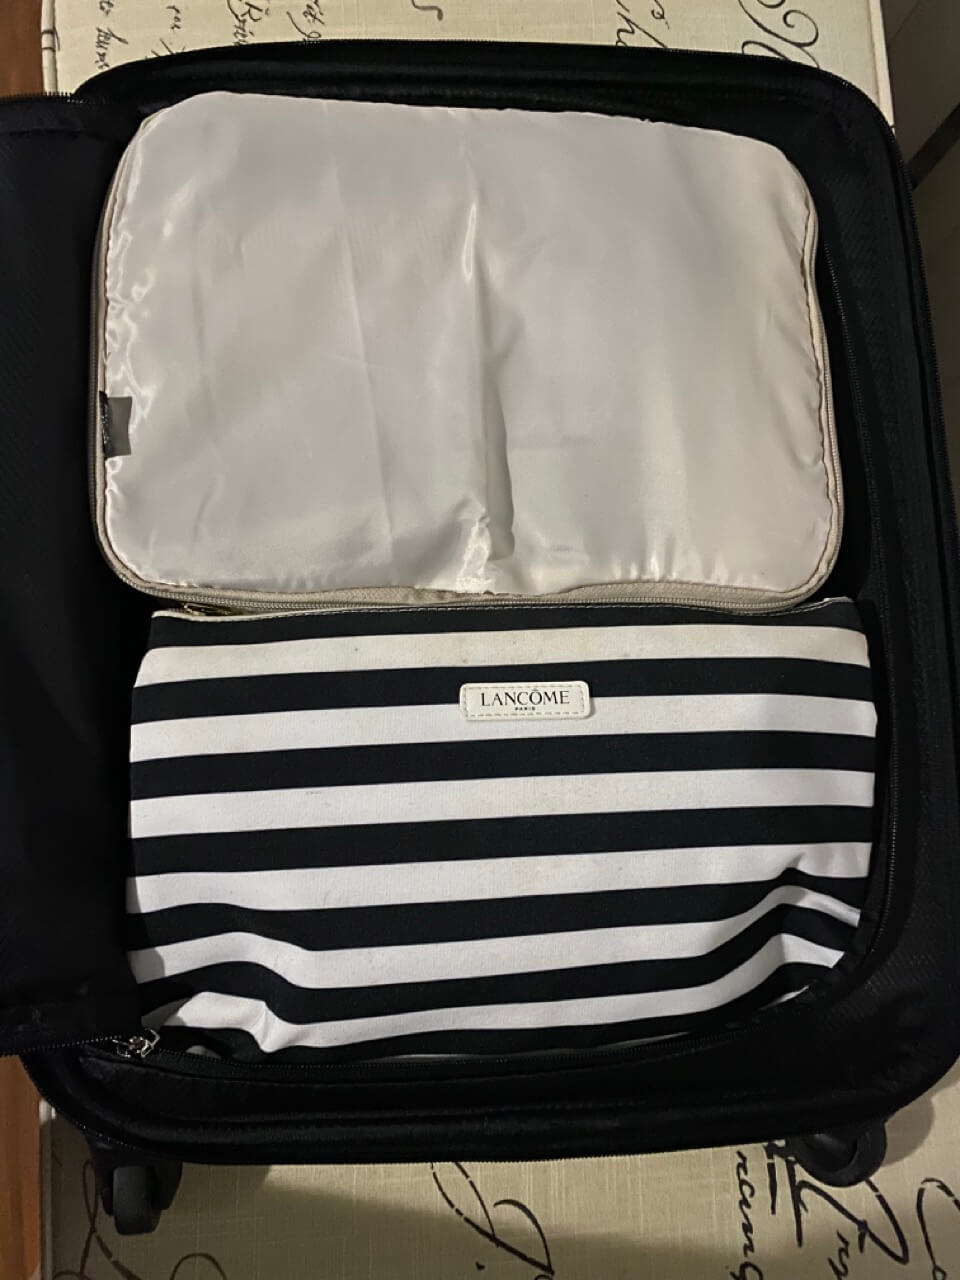 cream zipped packing cube in suitcase, lancome black and white striped toiletry organizer